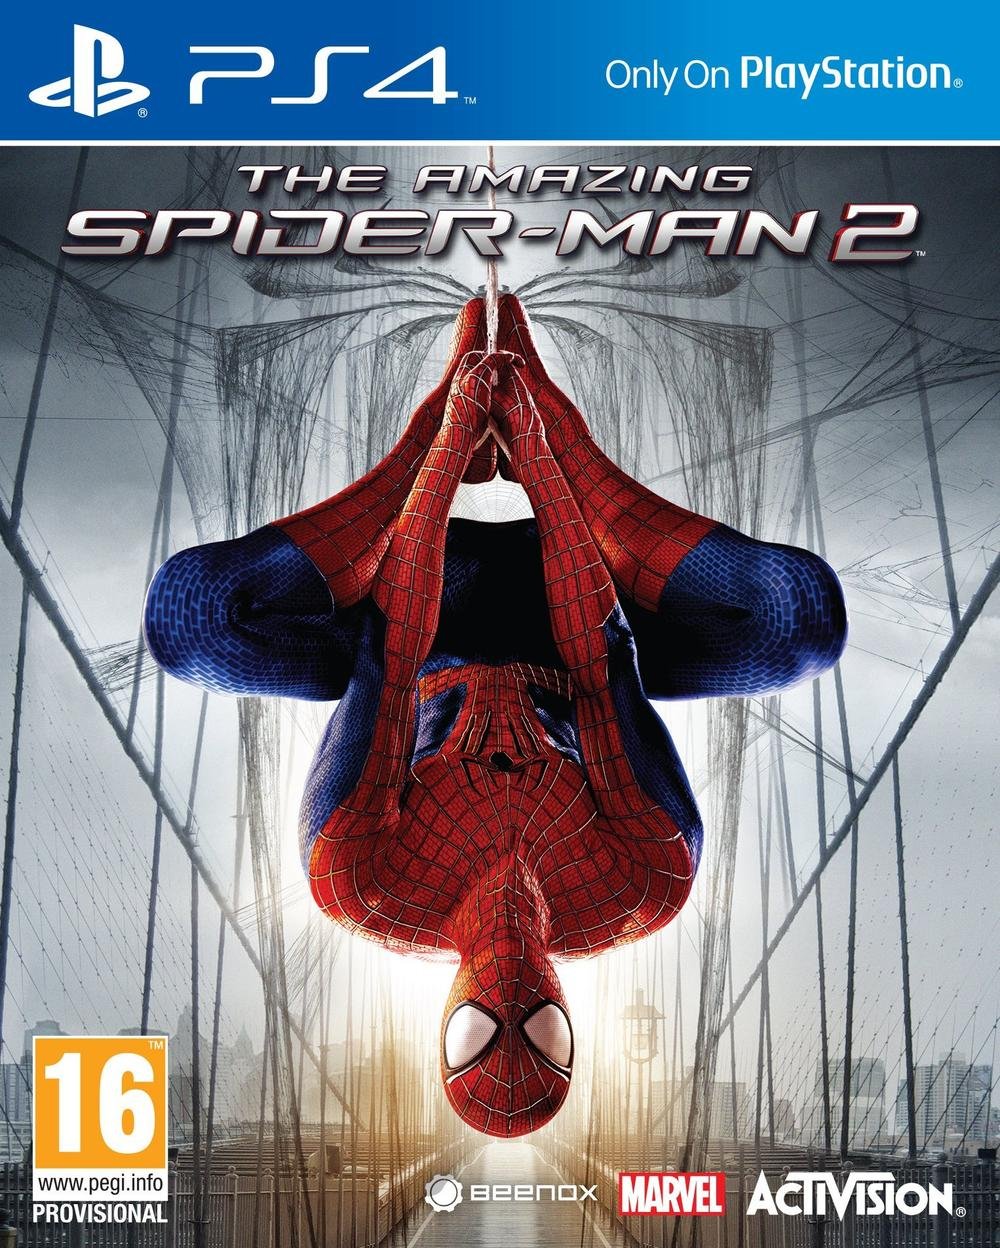 The Amazing Spiderman 2 PS4 (PKG) Download [8.01 GB]